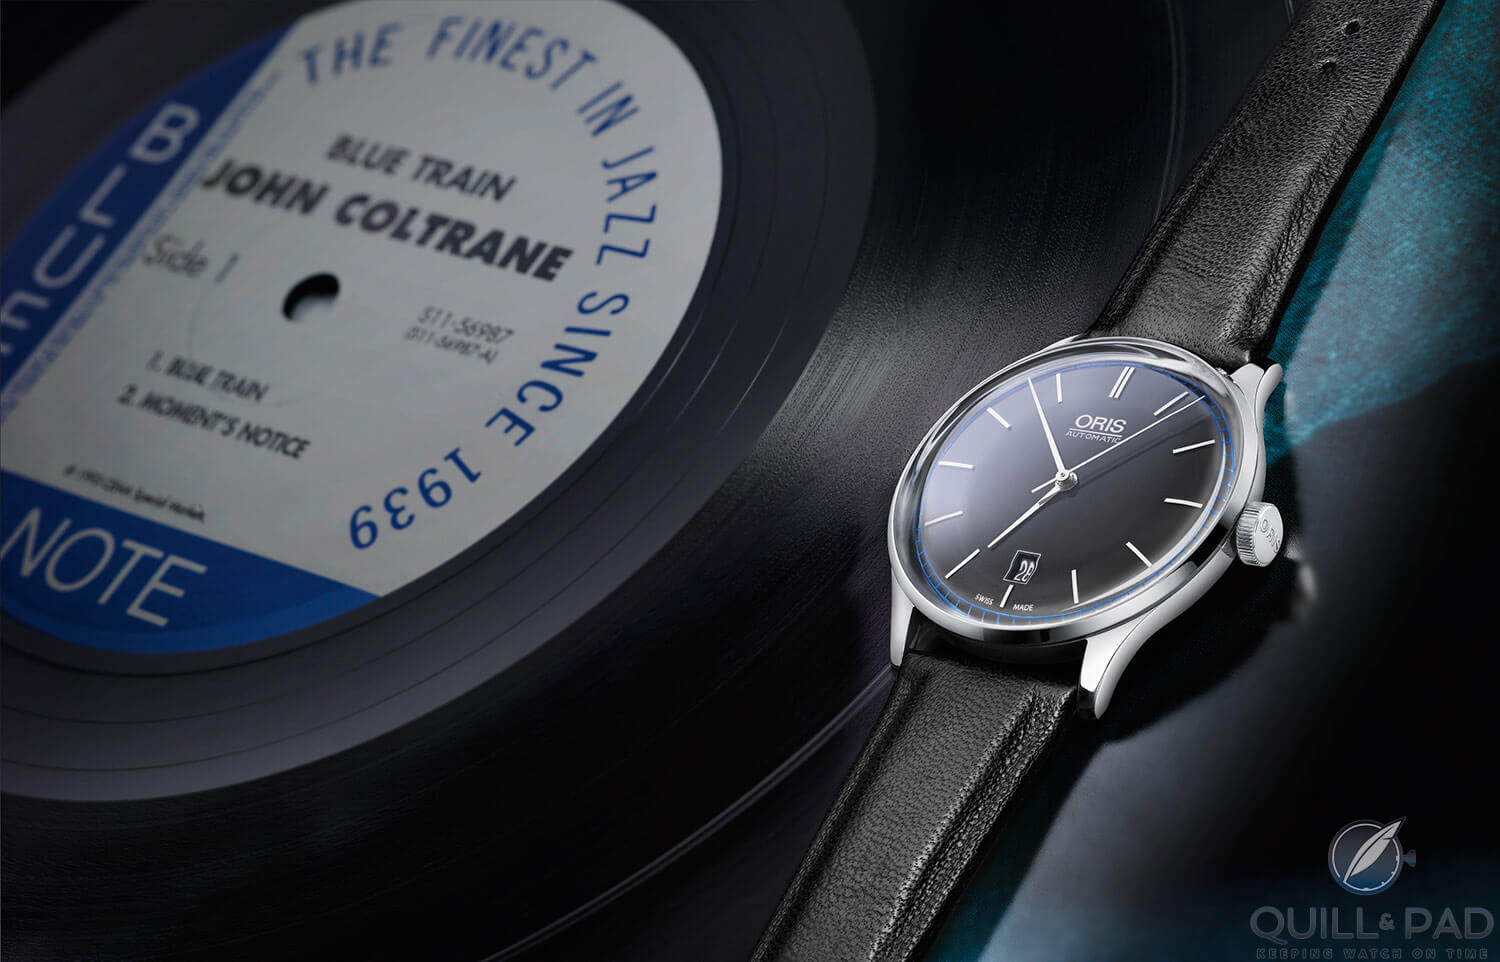 It was the 1957 John Coltrane album Blue Train that inspired an elegant Oris watch in a limited edition of 1,000 pieces in 2014